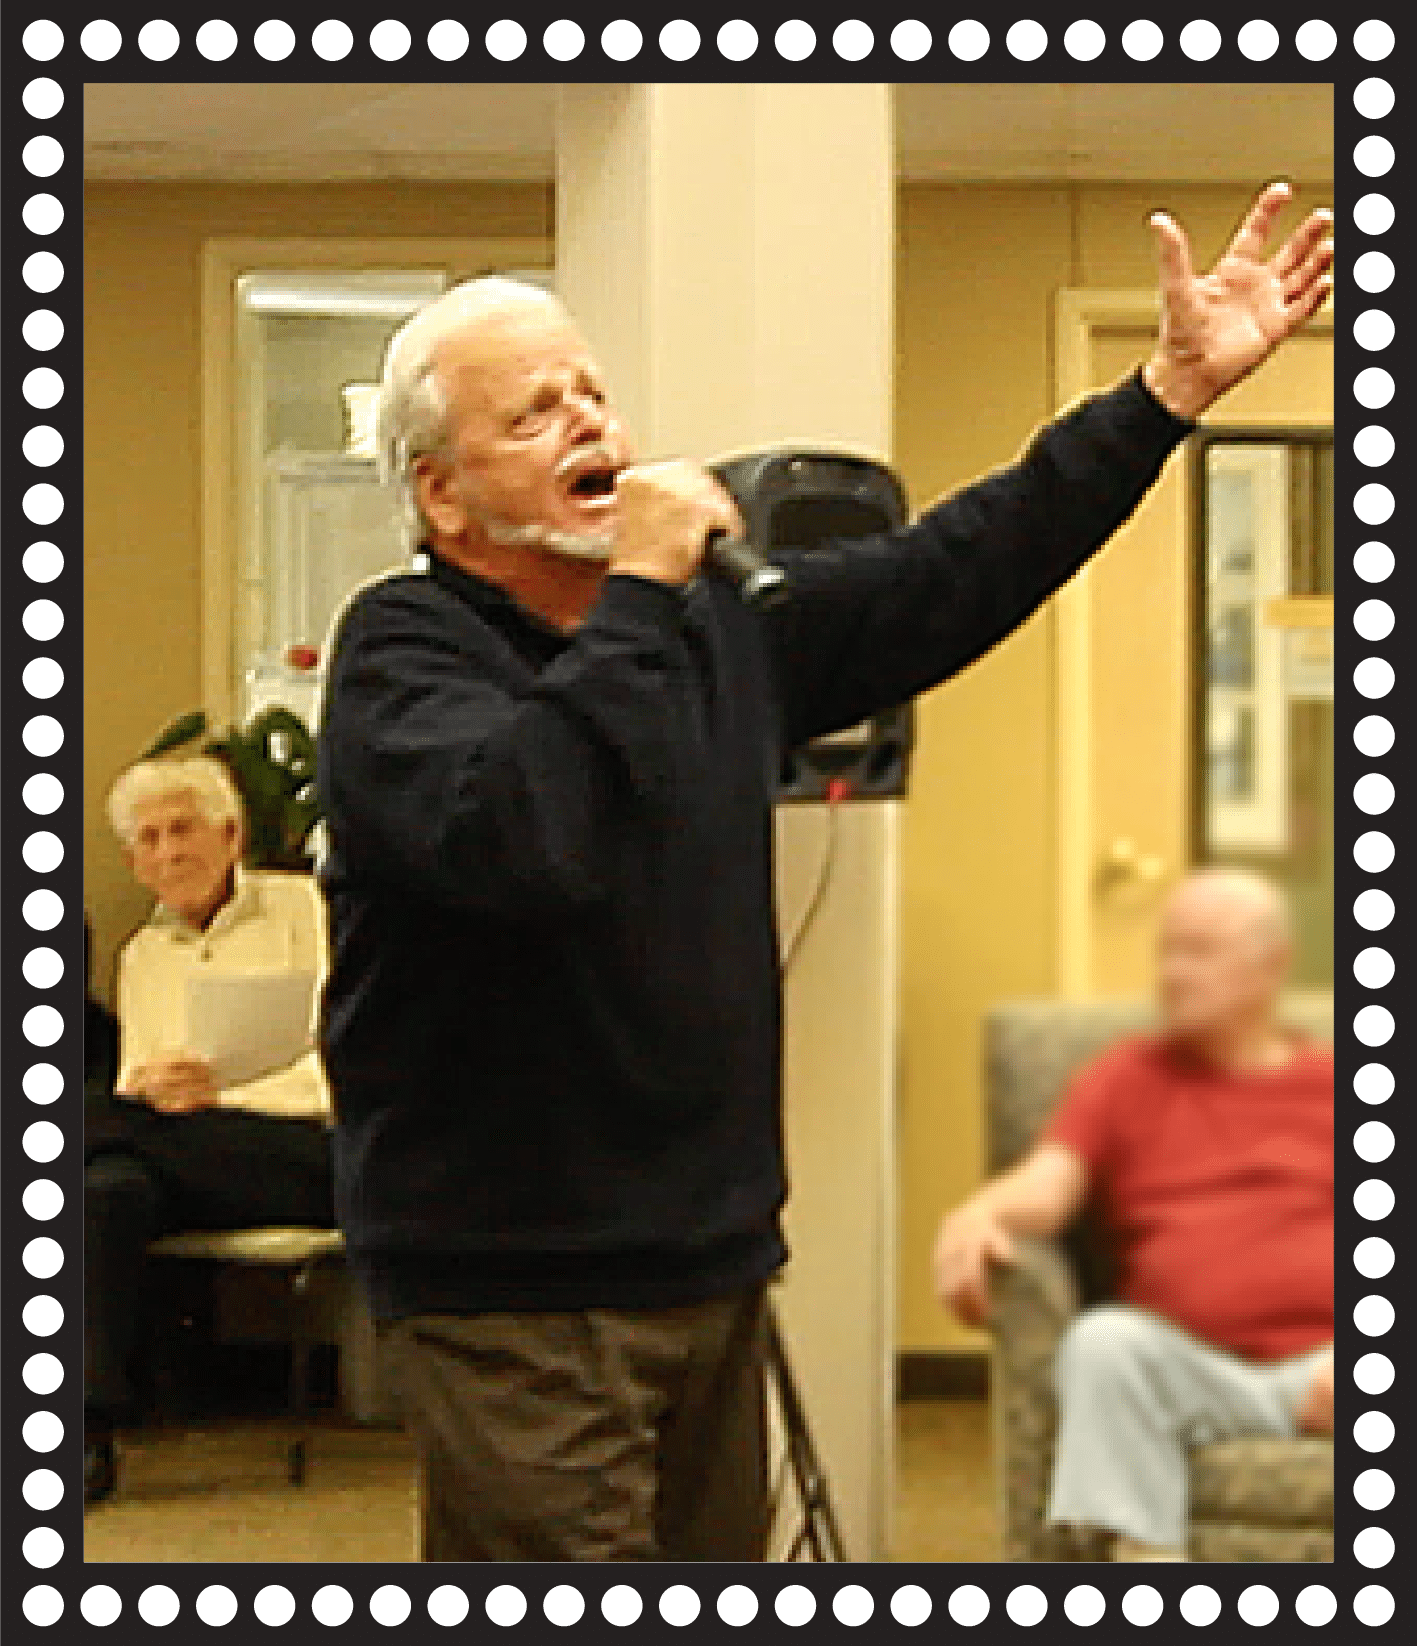 man singing with arms in air with microphone